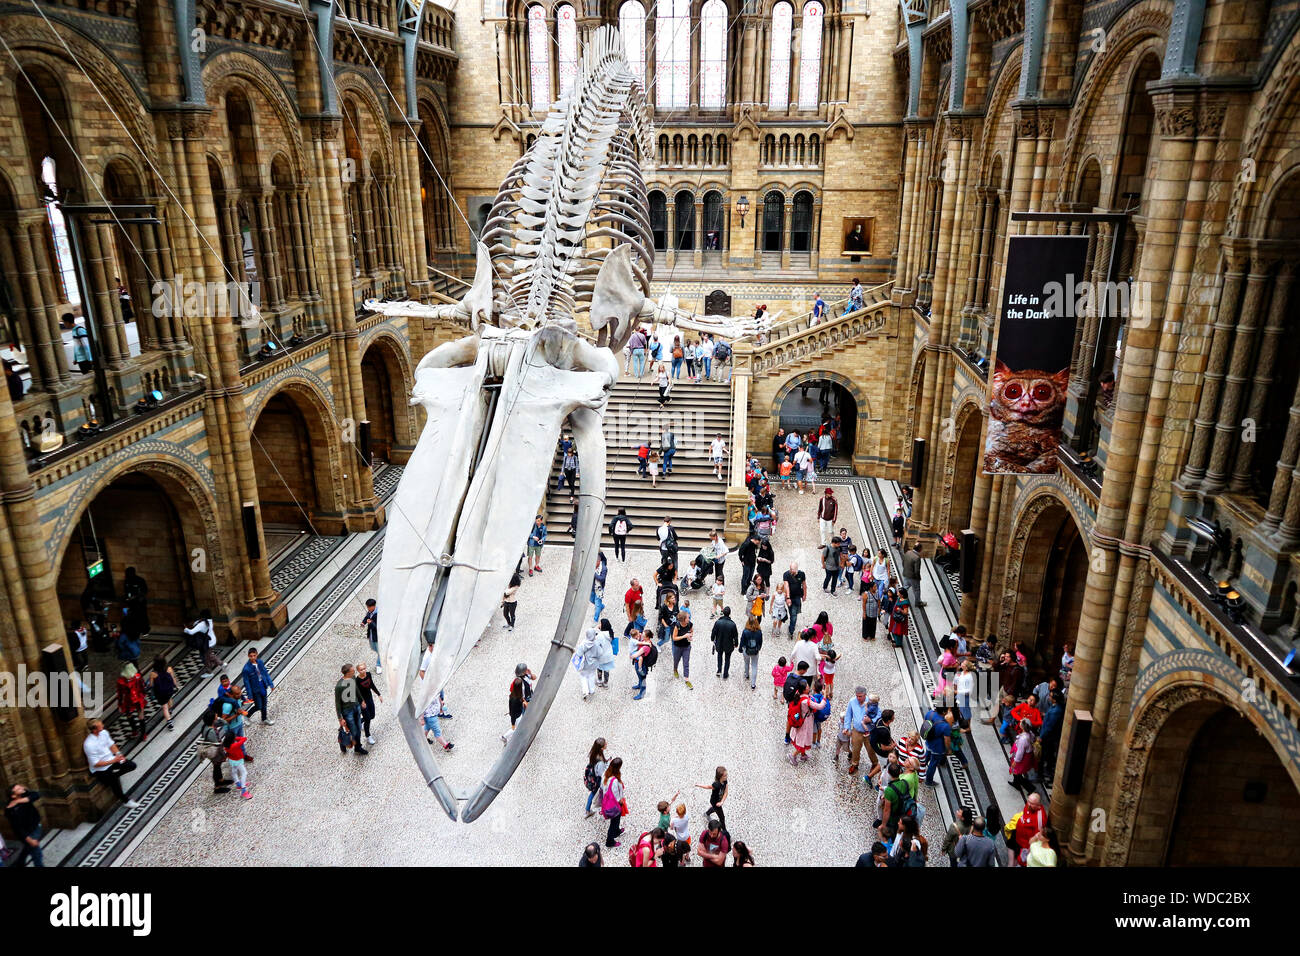 The Natural history museum, London Stock Photo